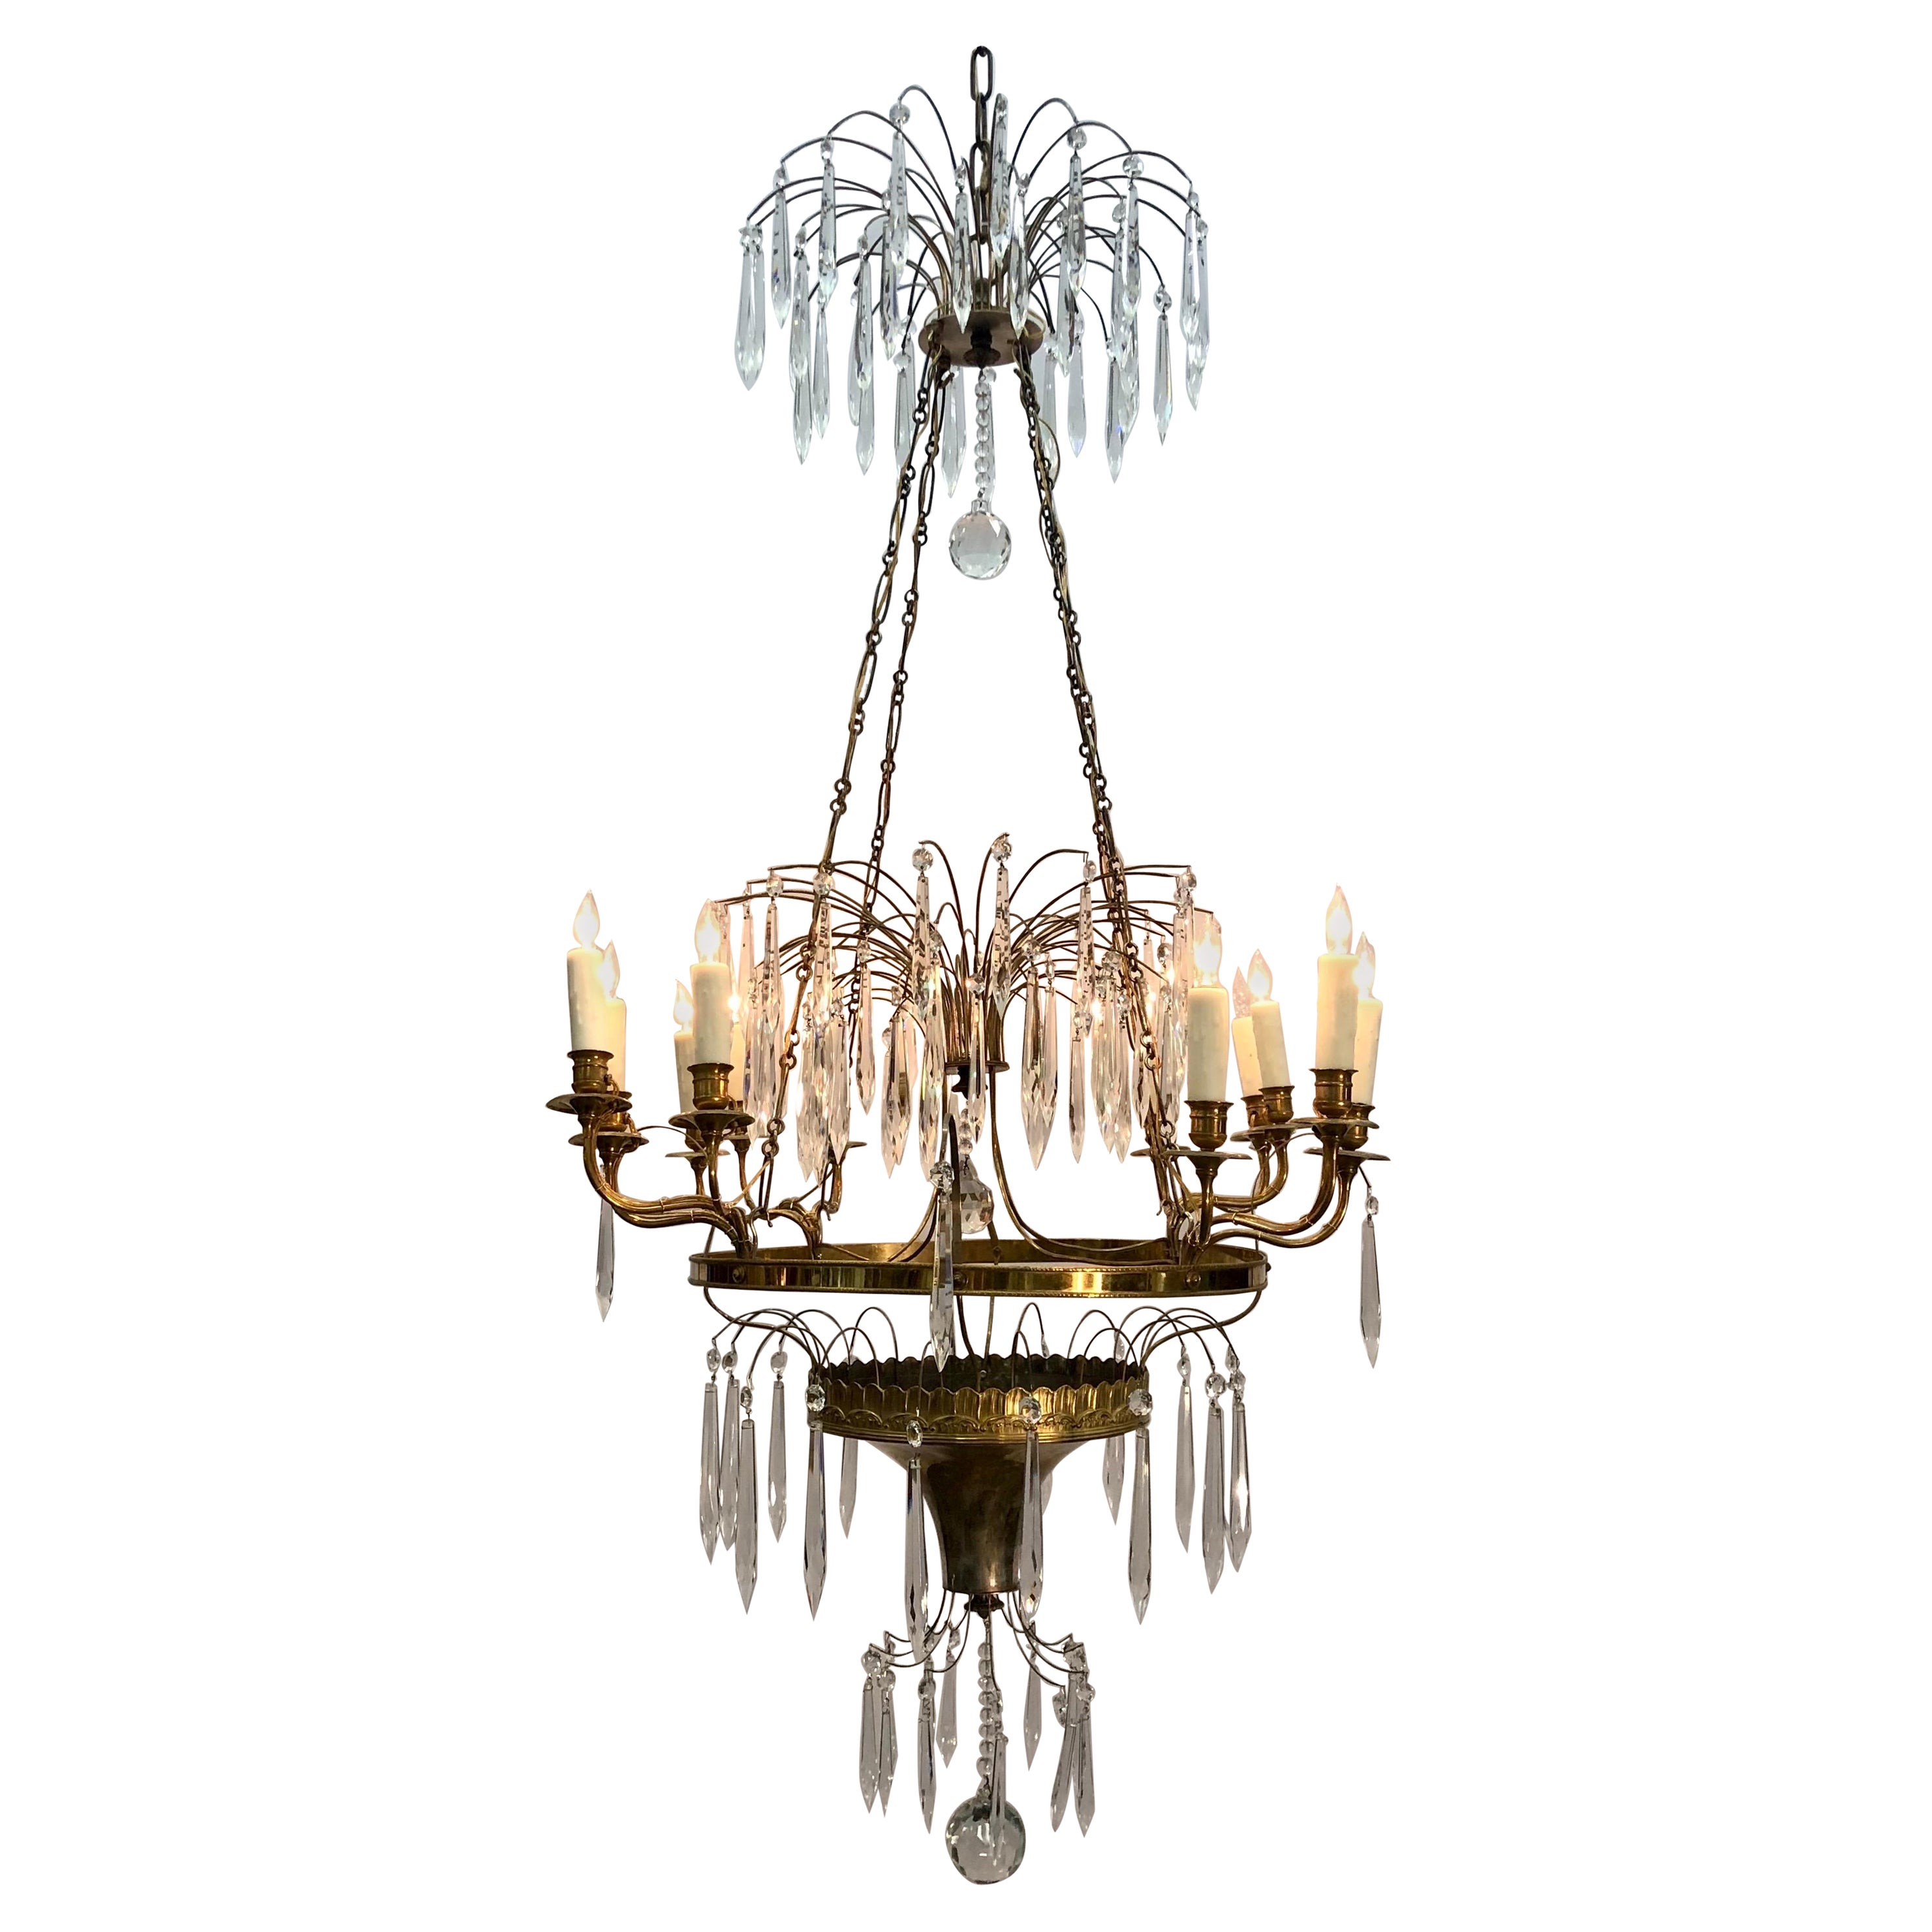 Gustavian / Russian Neoclassical Bronze & Silvered Crystal Chandelier, 19th C.